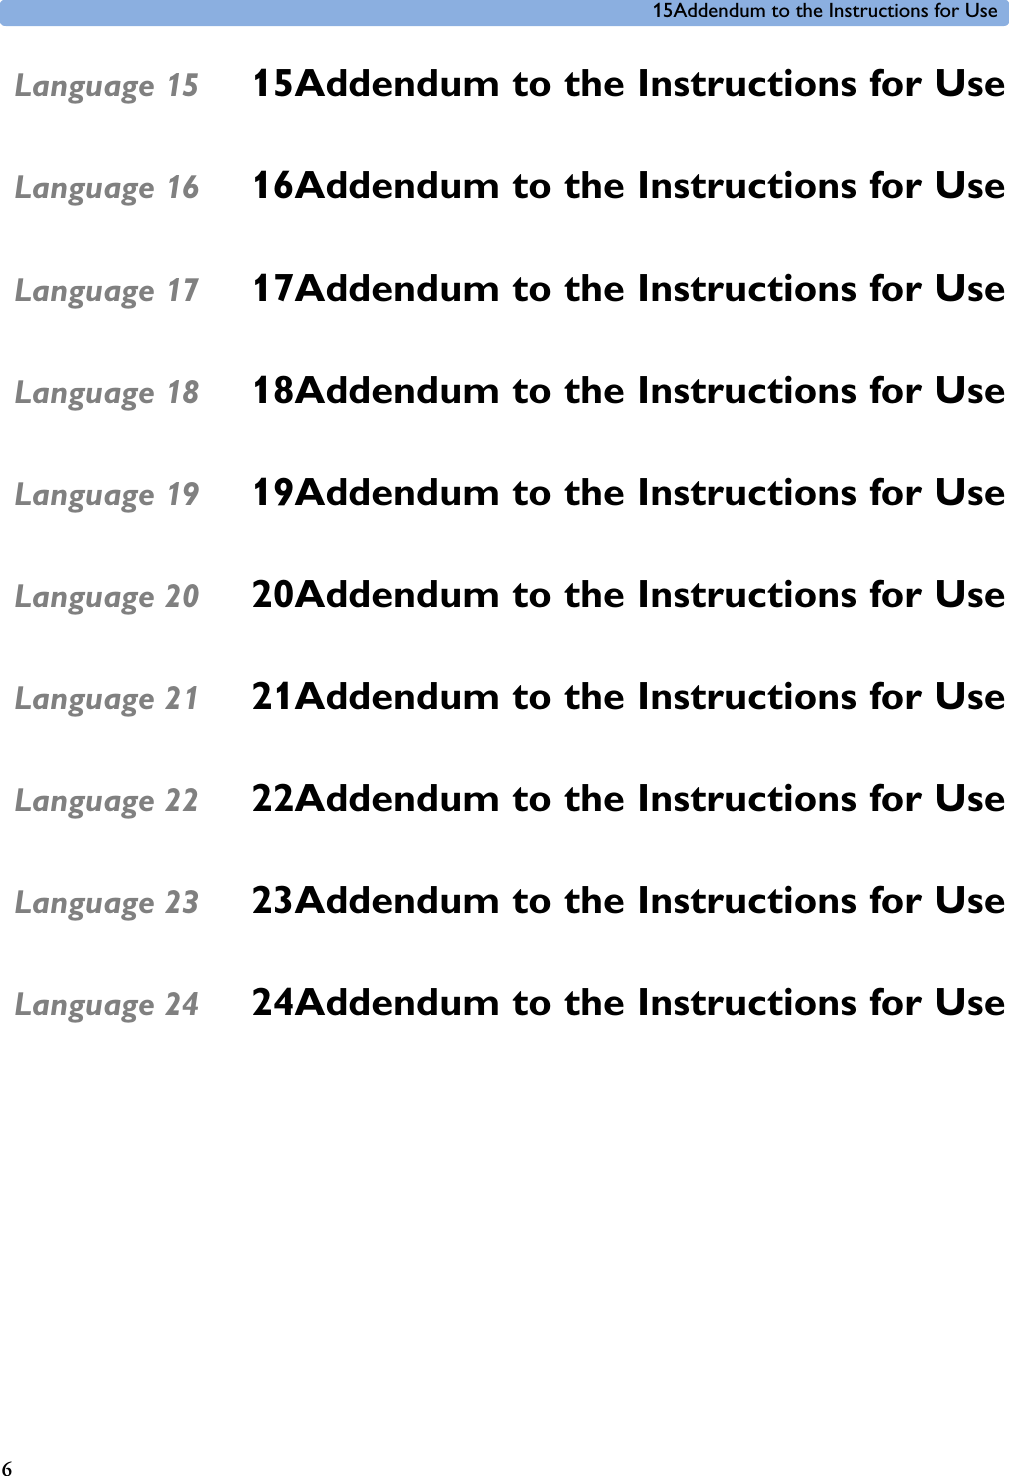 15Addendum to the Instructions for Use615Language 15  15Addendum to the Instructions for Use16Language 16  16Addendum to the Instructions for Use17Language 17  17Addendum to the Instructions for Use18Language 18  18Addendum to the Instructions for Use19Language 19  19Addendum to the Instructions for Use20Language 20  20Addendum to the Instructions for Use21Language 21  21Addendum to the Instructions for Use22Language 22  22Addendum to the Instructions for Use23Language 23  23Addendum to the Instructions for Use24Language 24  24Addendum to the Instructions for Use